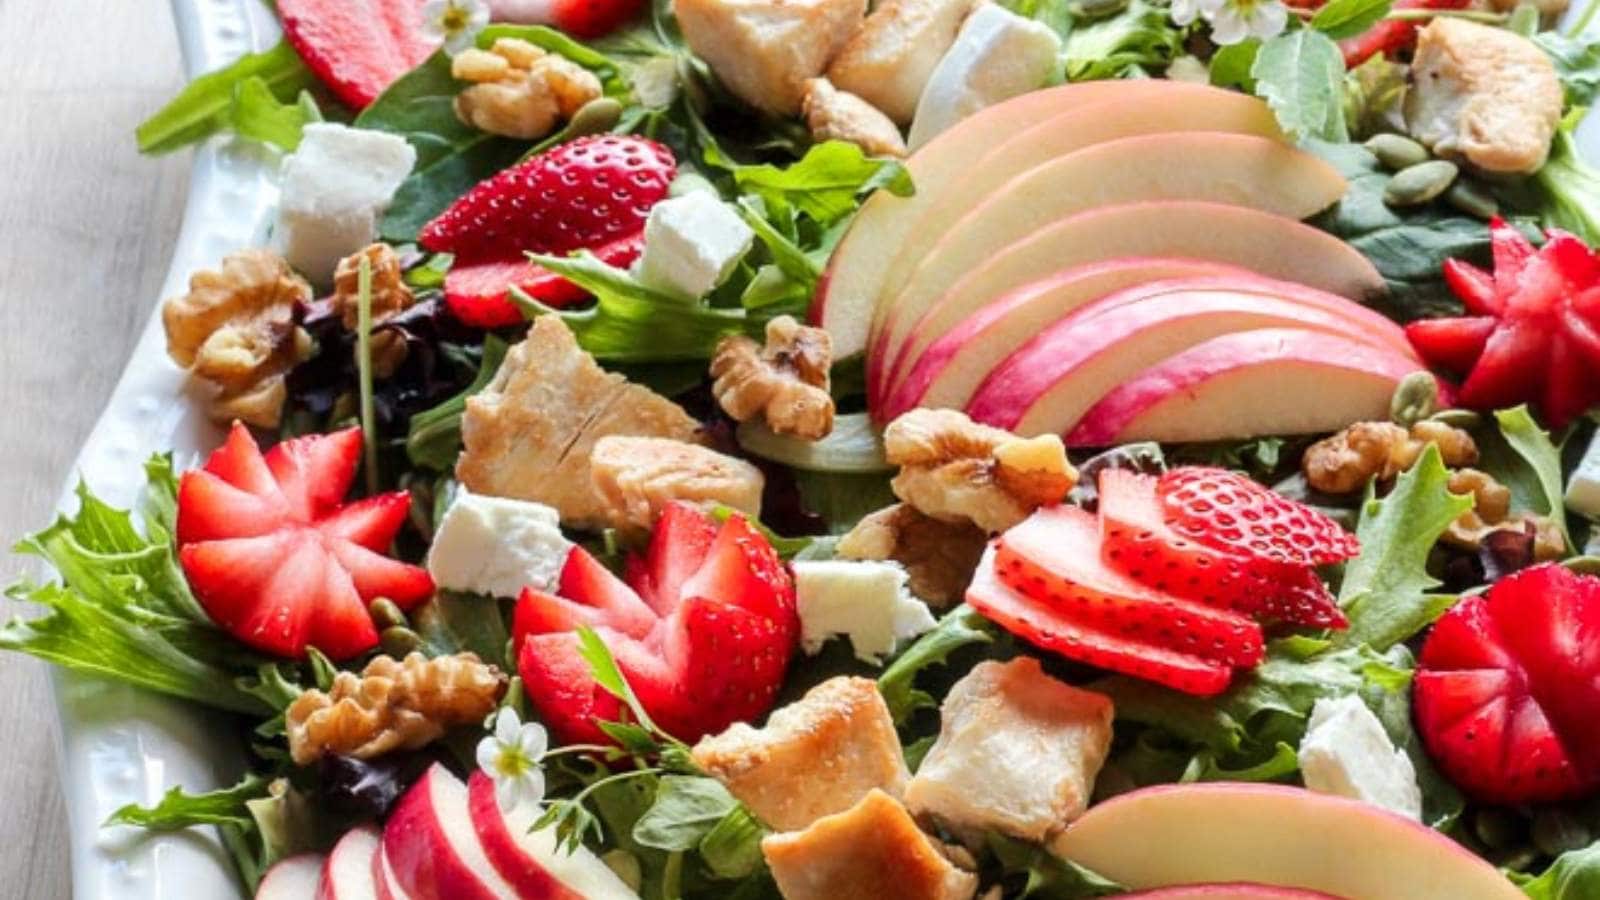 Strawberry Chicken Salad With Creamy Maple Dressing recipe by Delicious On A Dime.